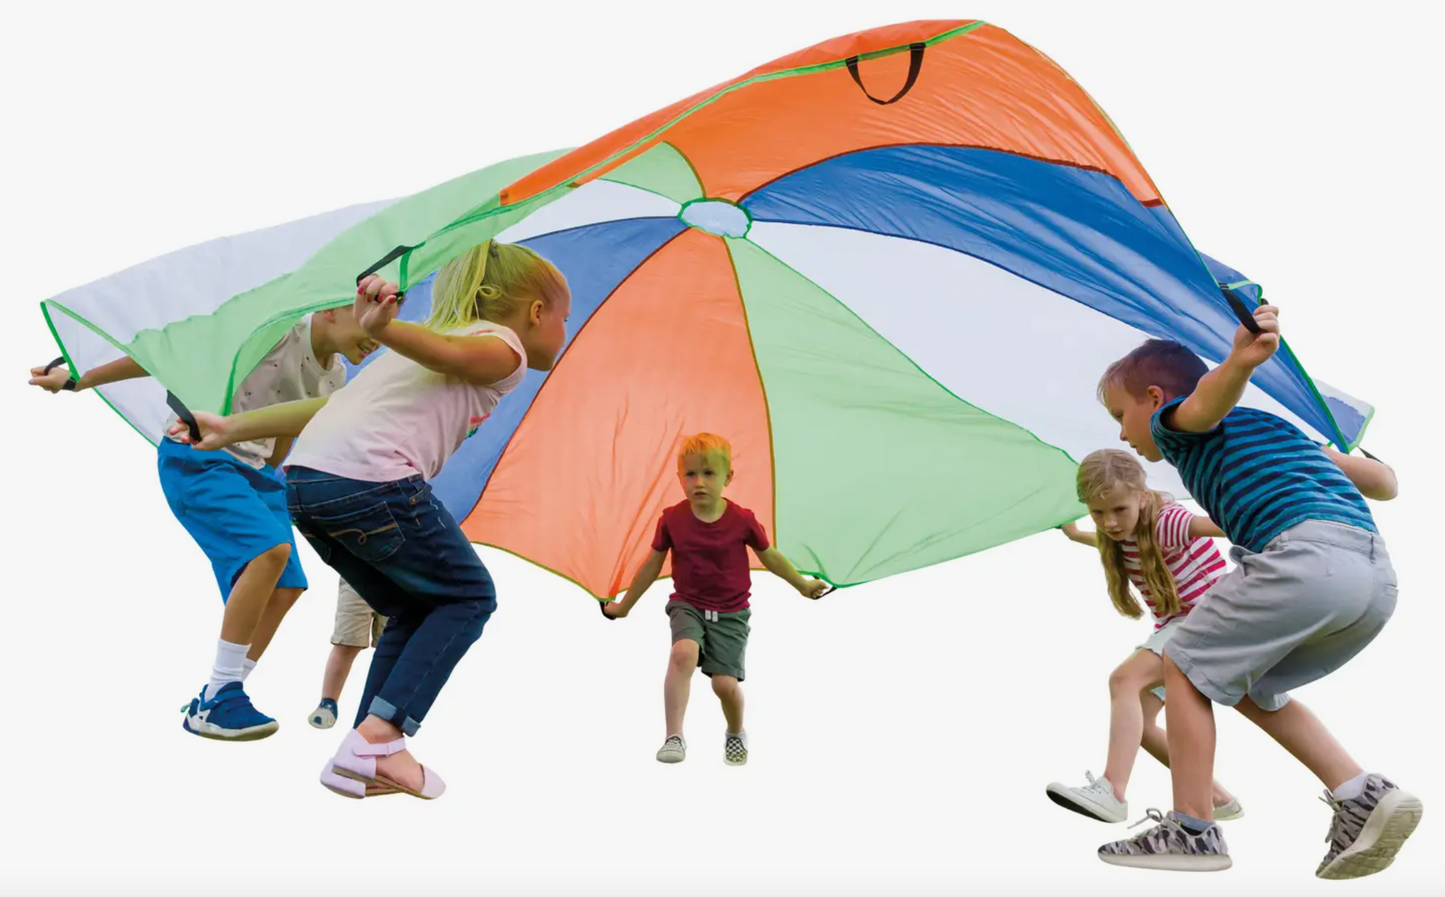 Children running inwardly in a circle holding the handles of a color-blocked parachute.